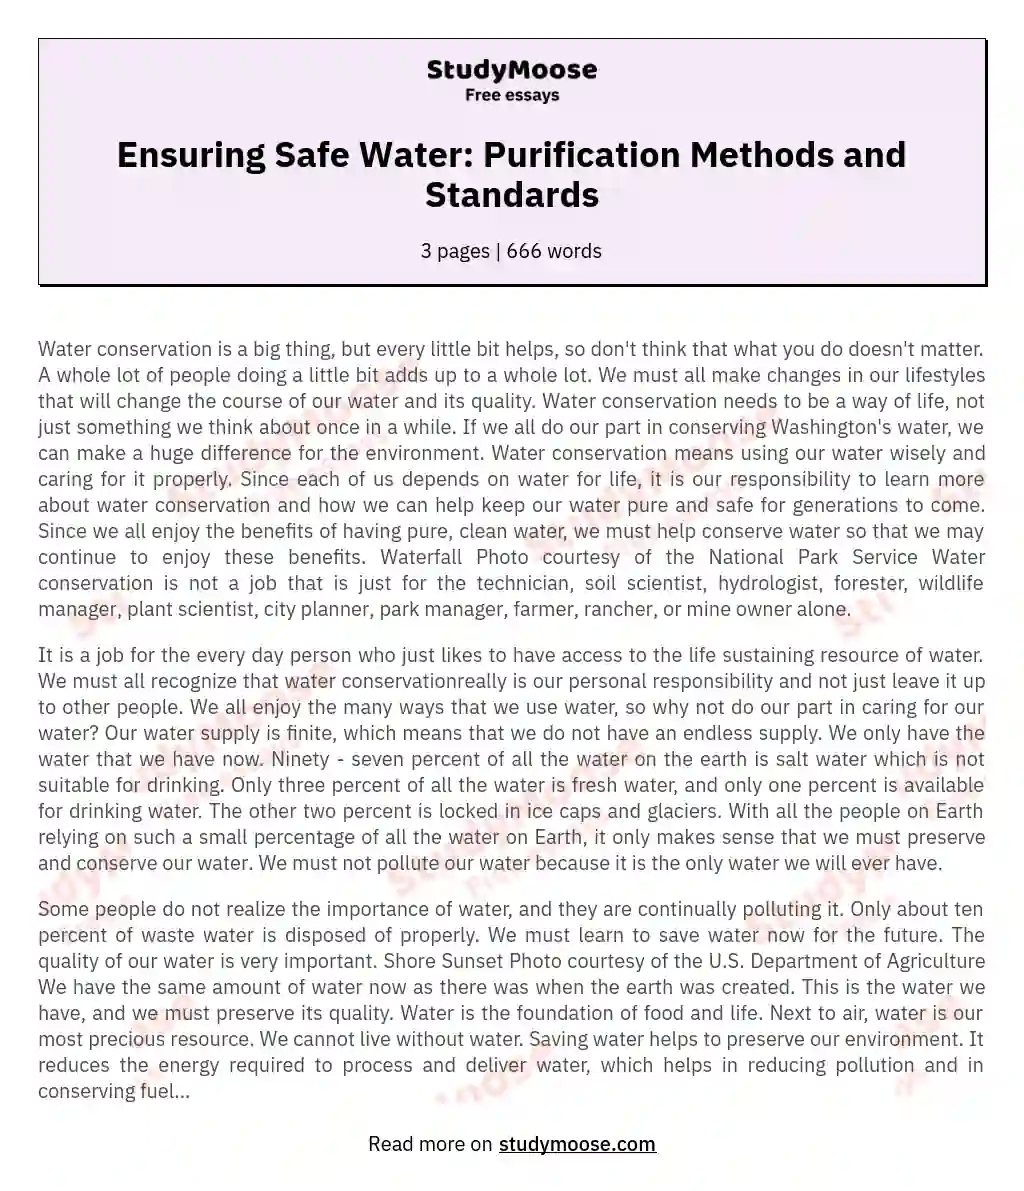 Ensuring Safe Water: Purification Methods and Standards essay